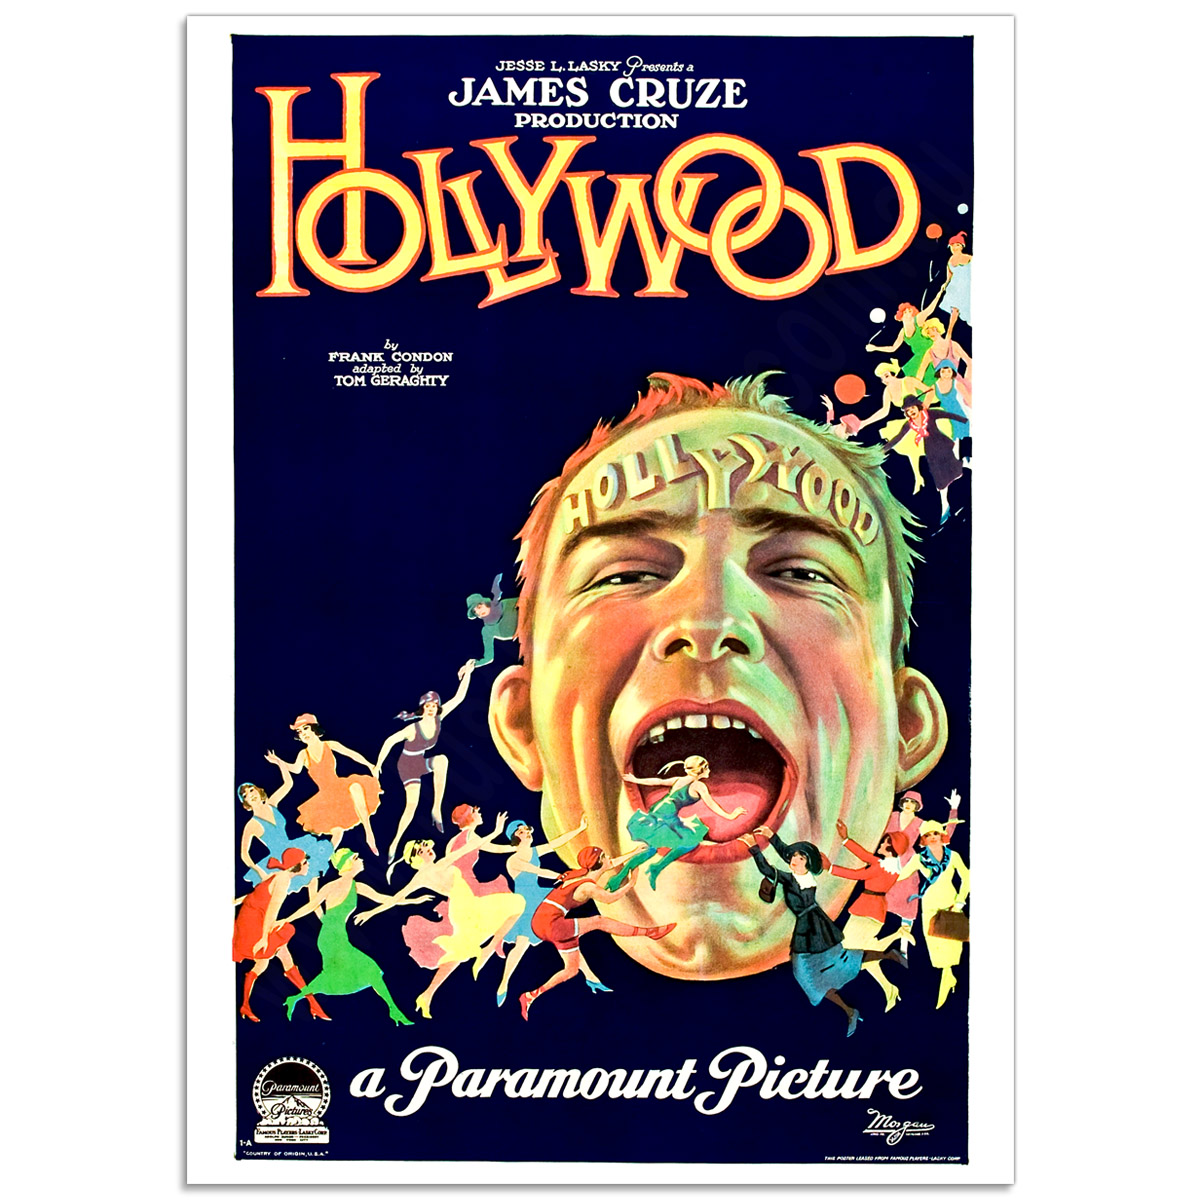 Movie Poster - Hollywood James Cruze 1923